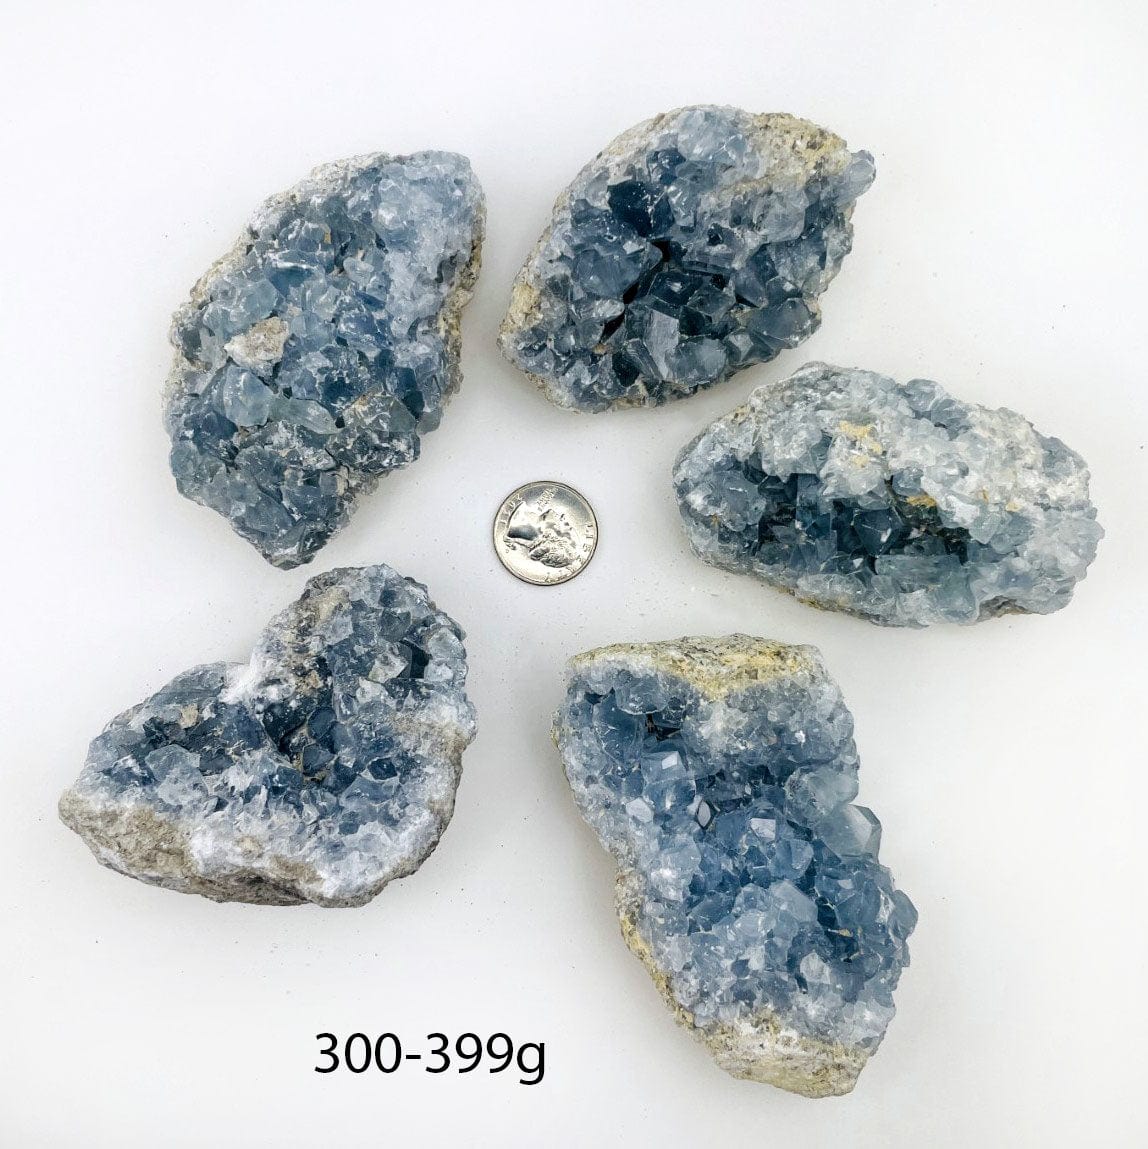 Celestite Crystals in size 300-399g next to a quarter for size reference